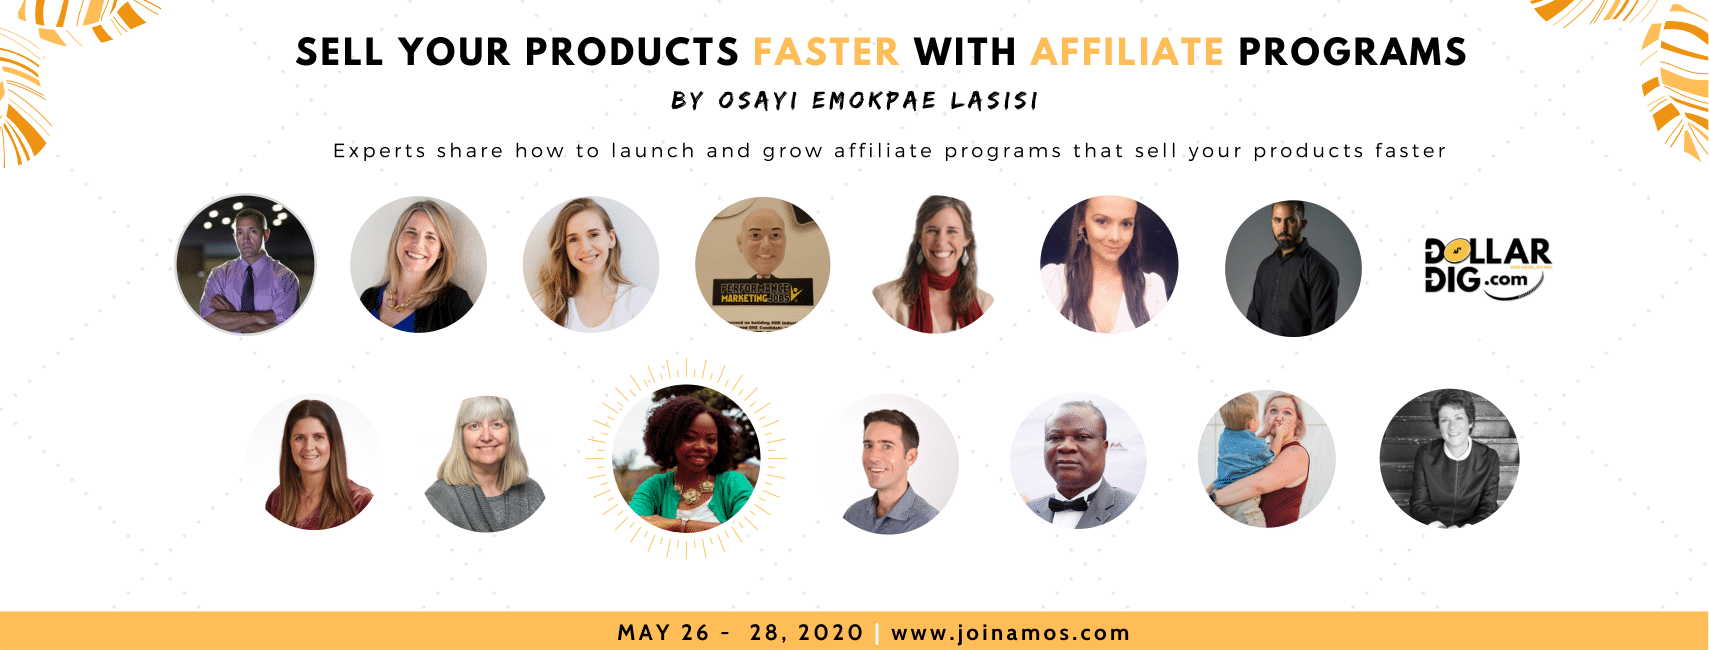 How to sell your products and services faster using Affiliate Programs